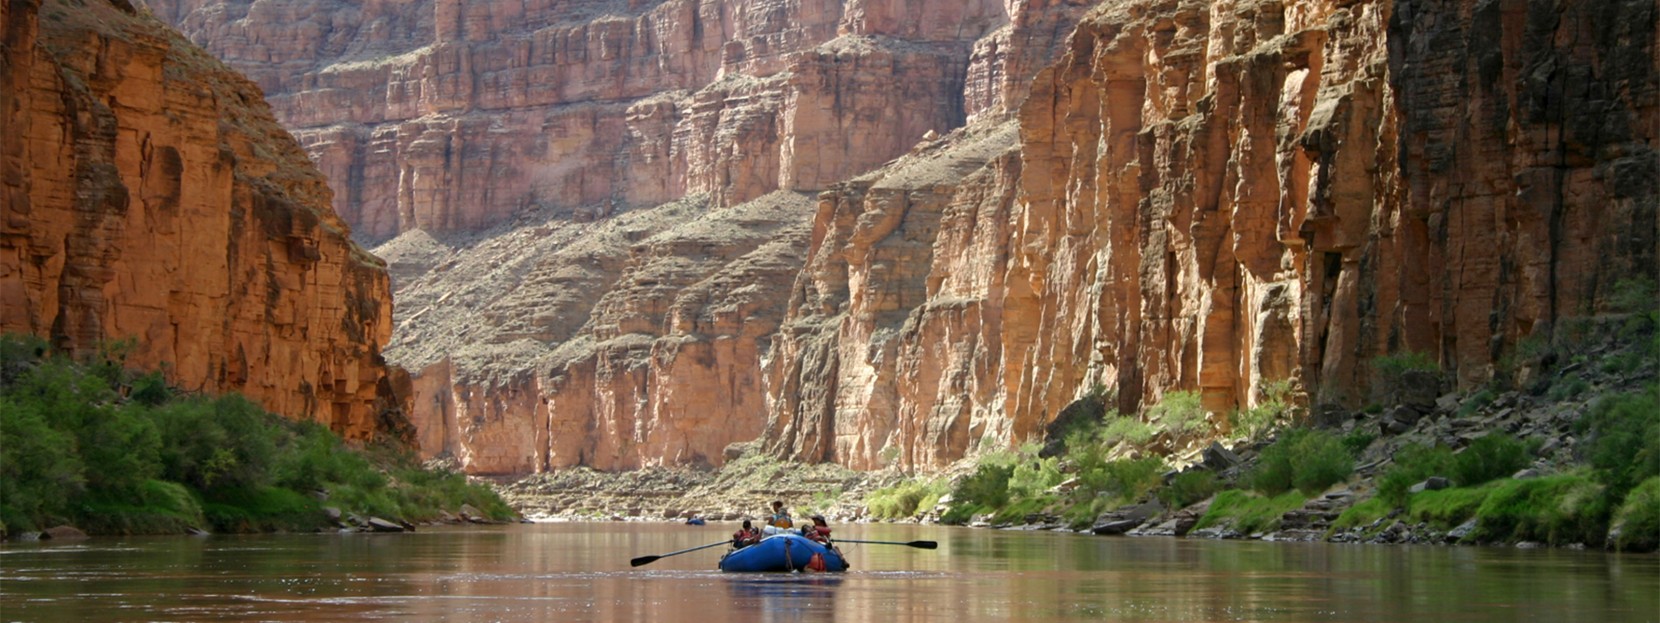 A raft with 3 people floats down a calm section of the Colorado River, dwarfed by towering canyon walls.